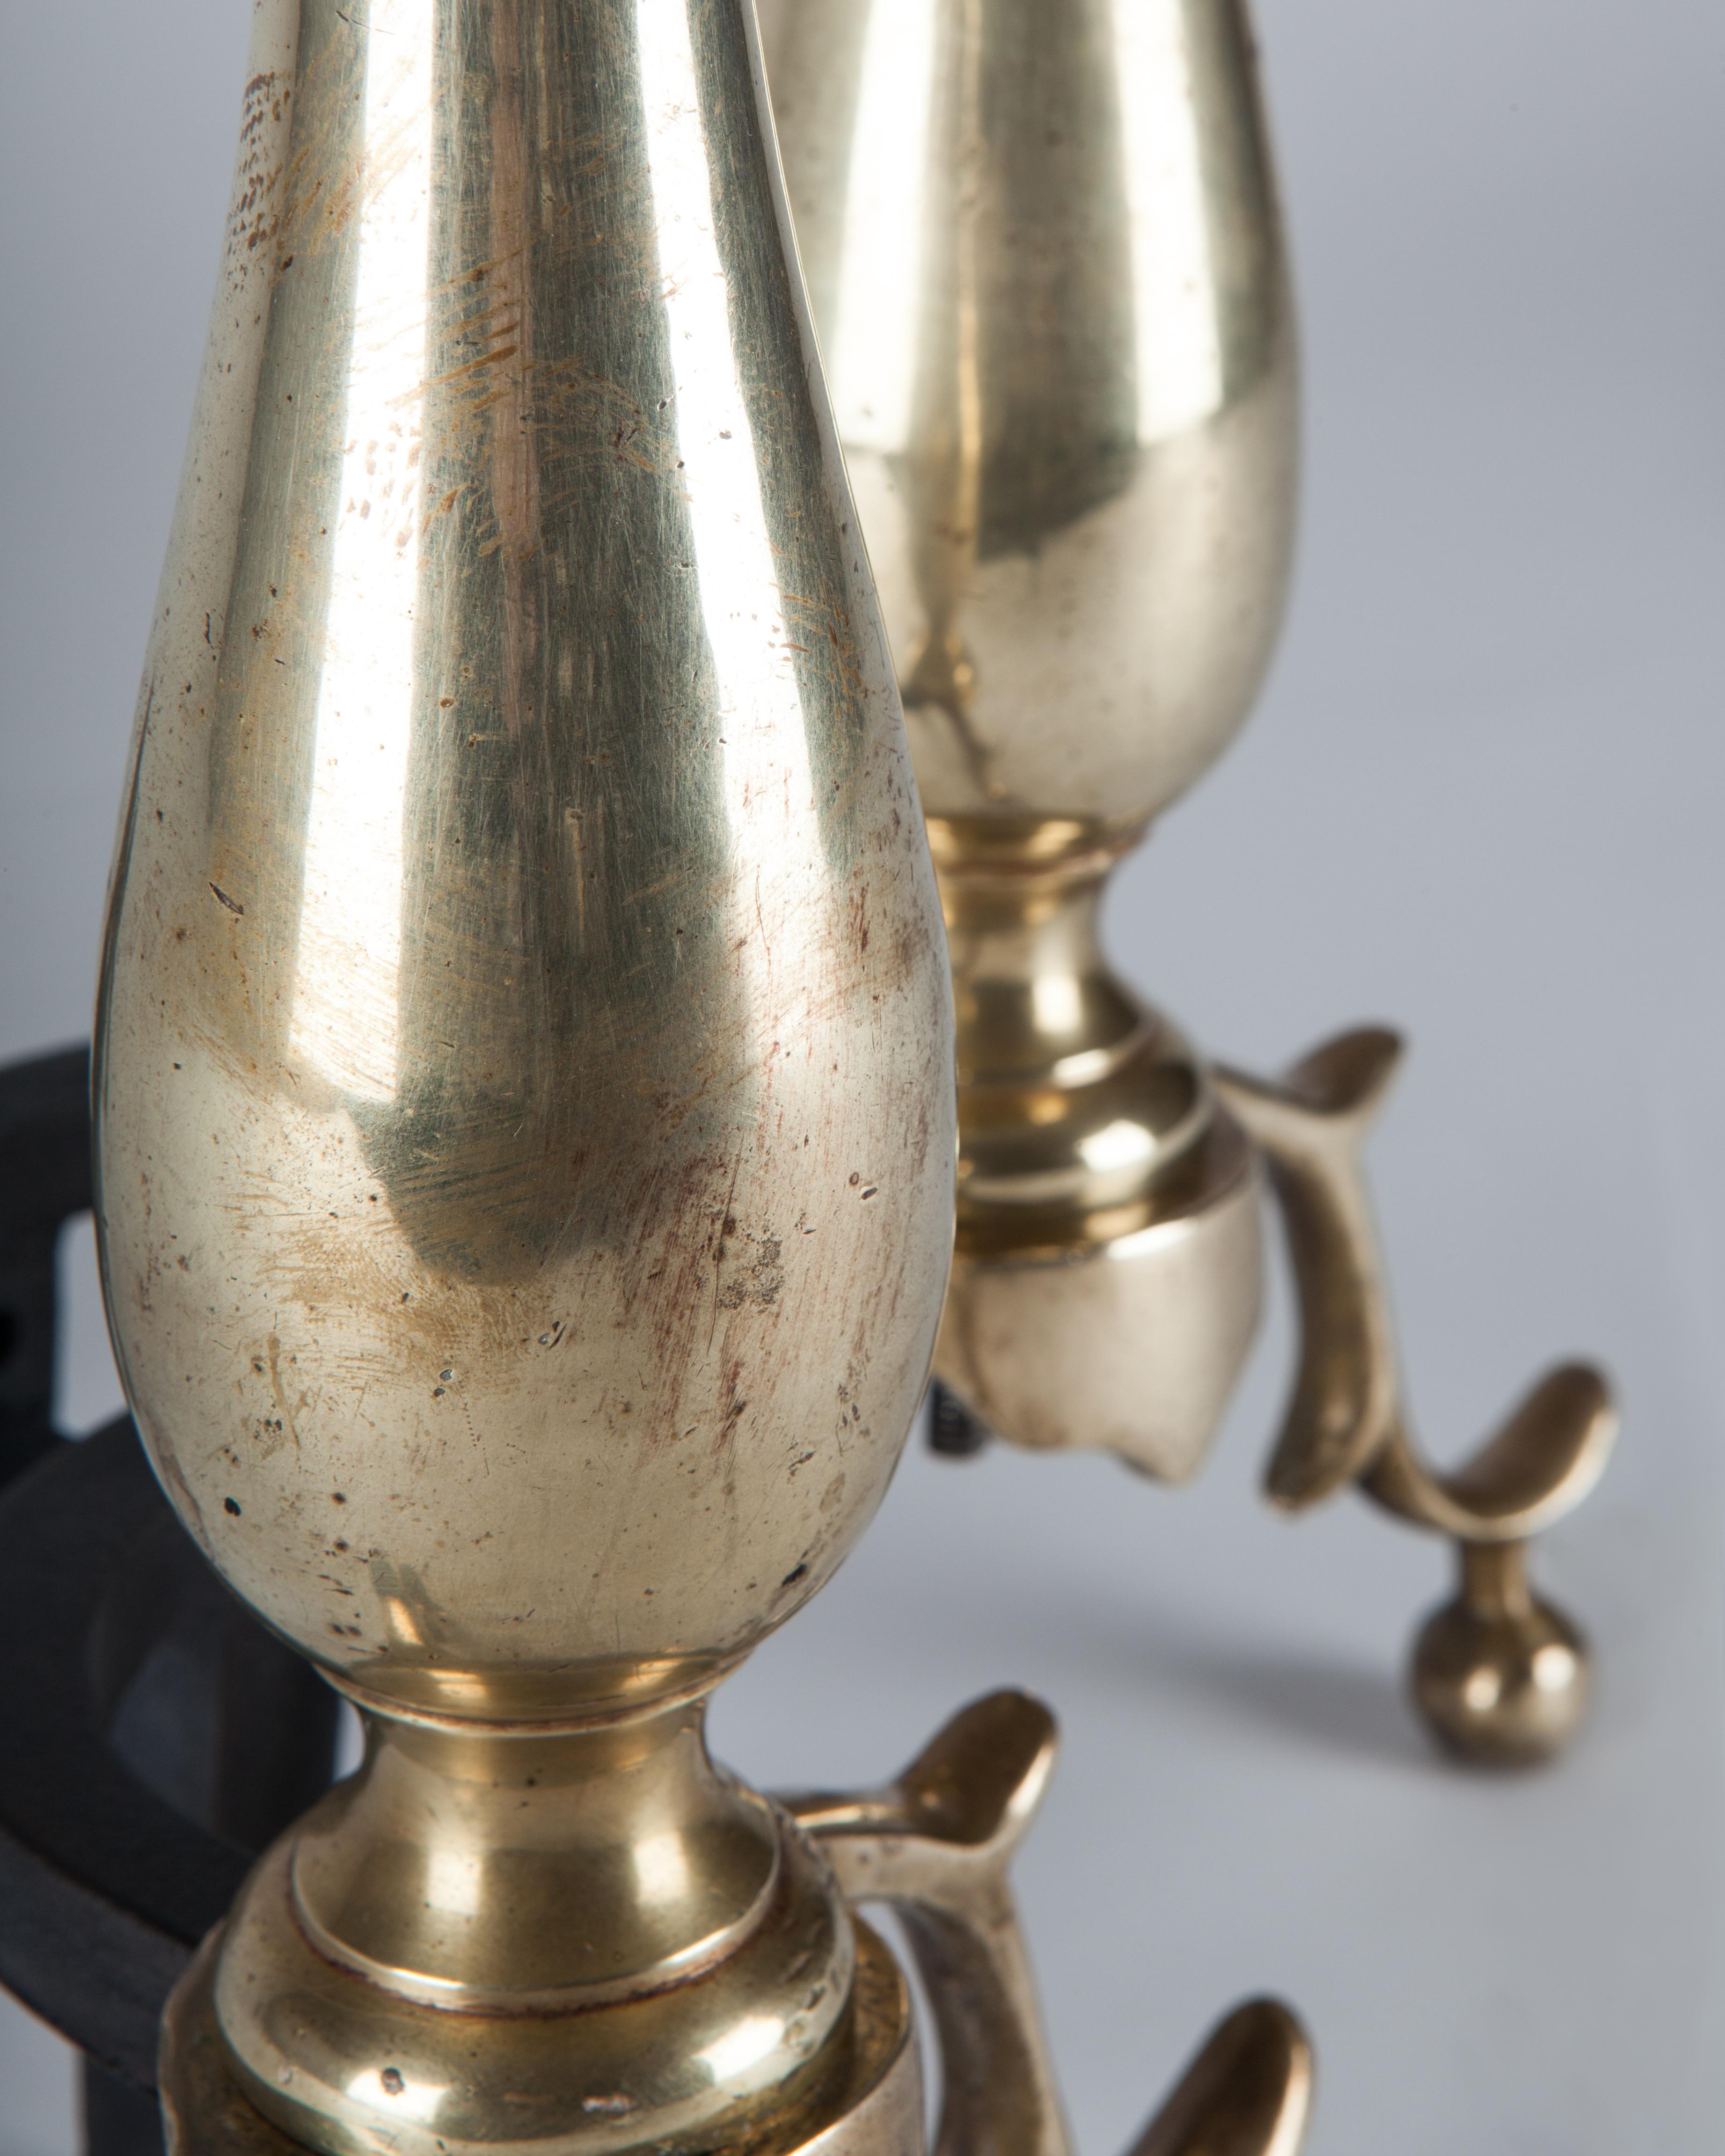 Blackened Antique Pair of Brass Baluster Turned Andirons with Cast Legs, circa 1920